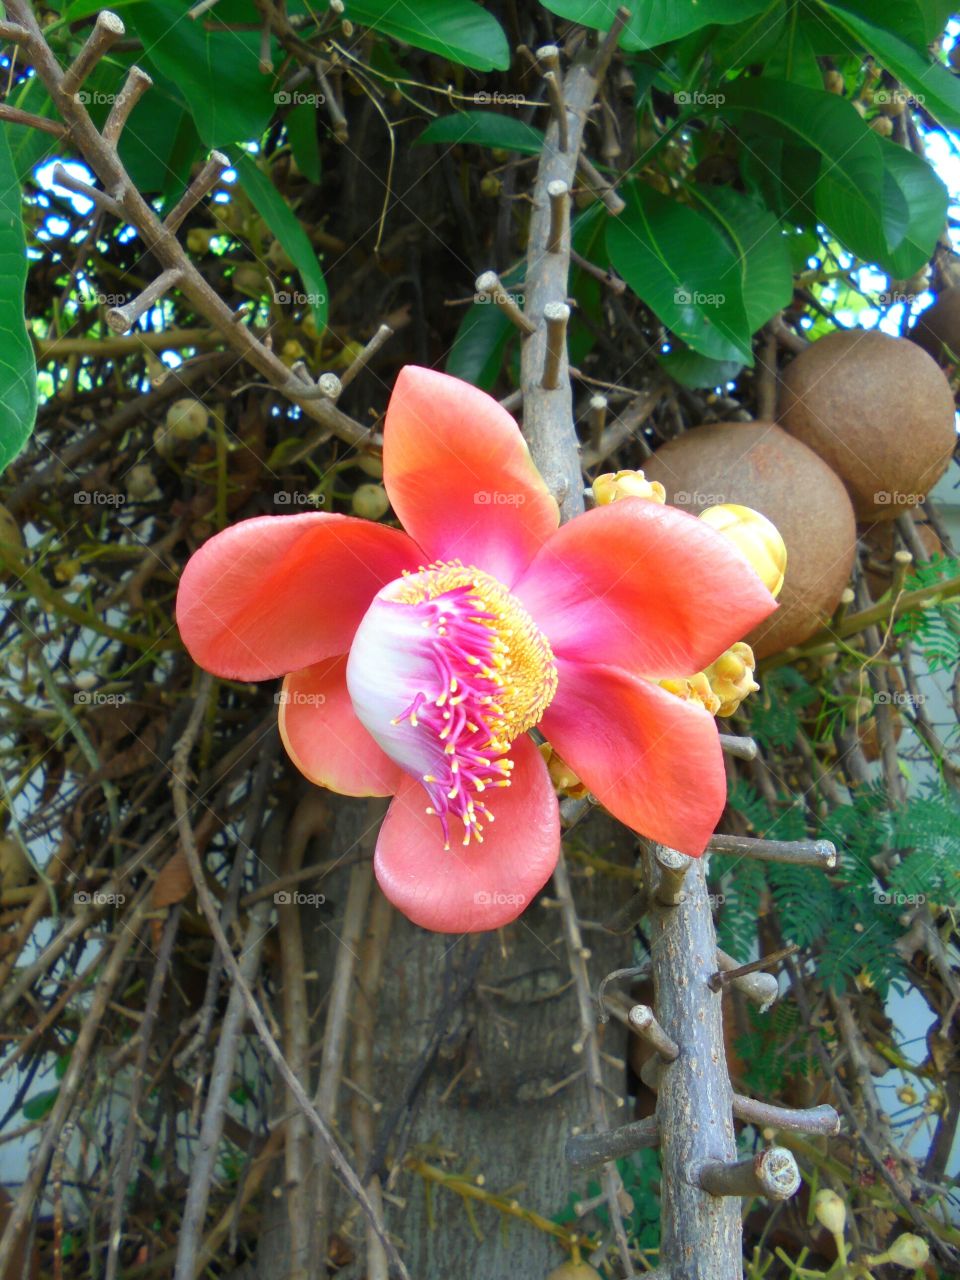 Cannon ball tree flower